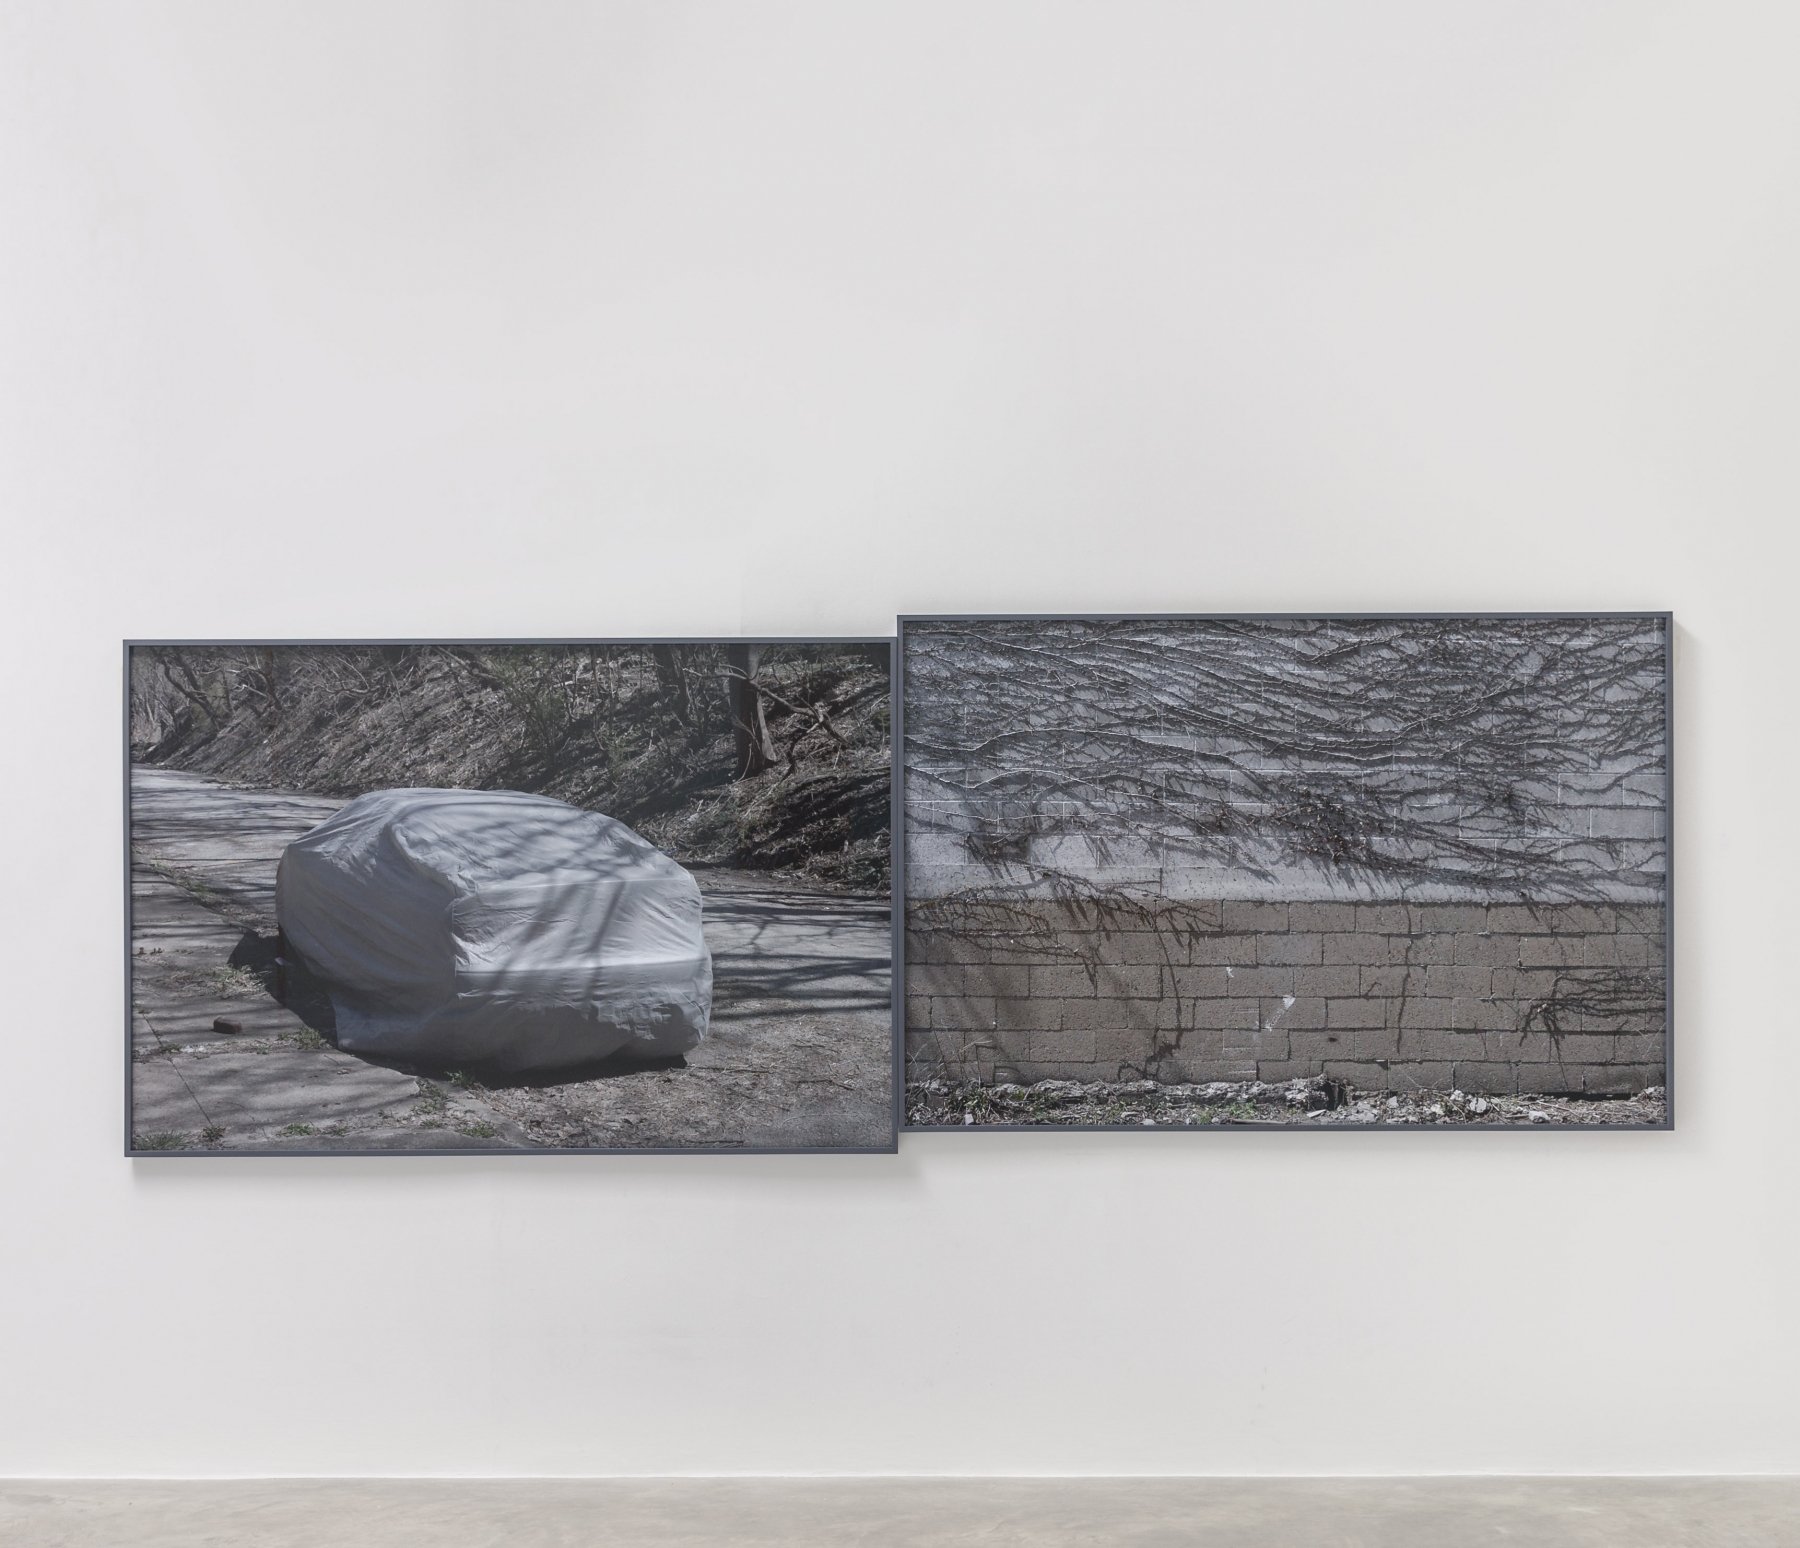 Willie Doherty&nbsp;
Dreams of Security, Dreams of Infiltration, 2018
diptych, framed pigment print mounted on Dibond,&nbsp;edition of 3
107.5 x 160.5 cm / 42.3 x 63.2 in each framed&nbsp;
&nbsp;